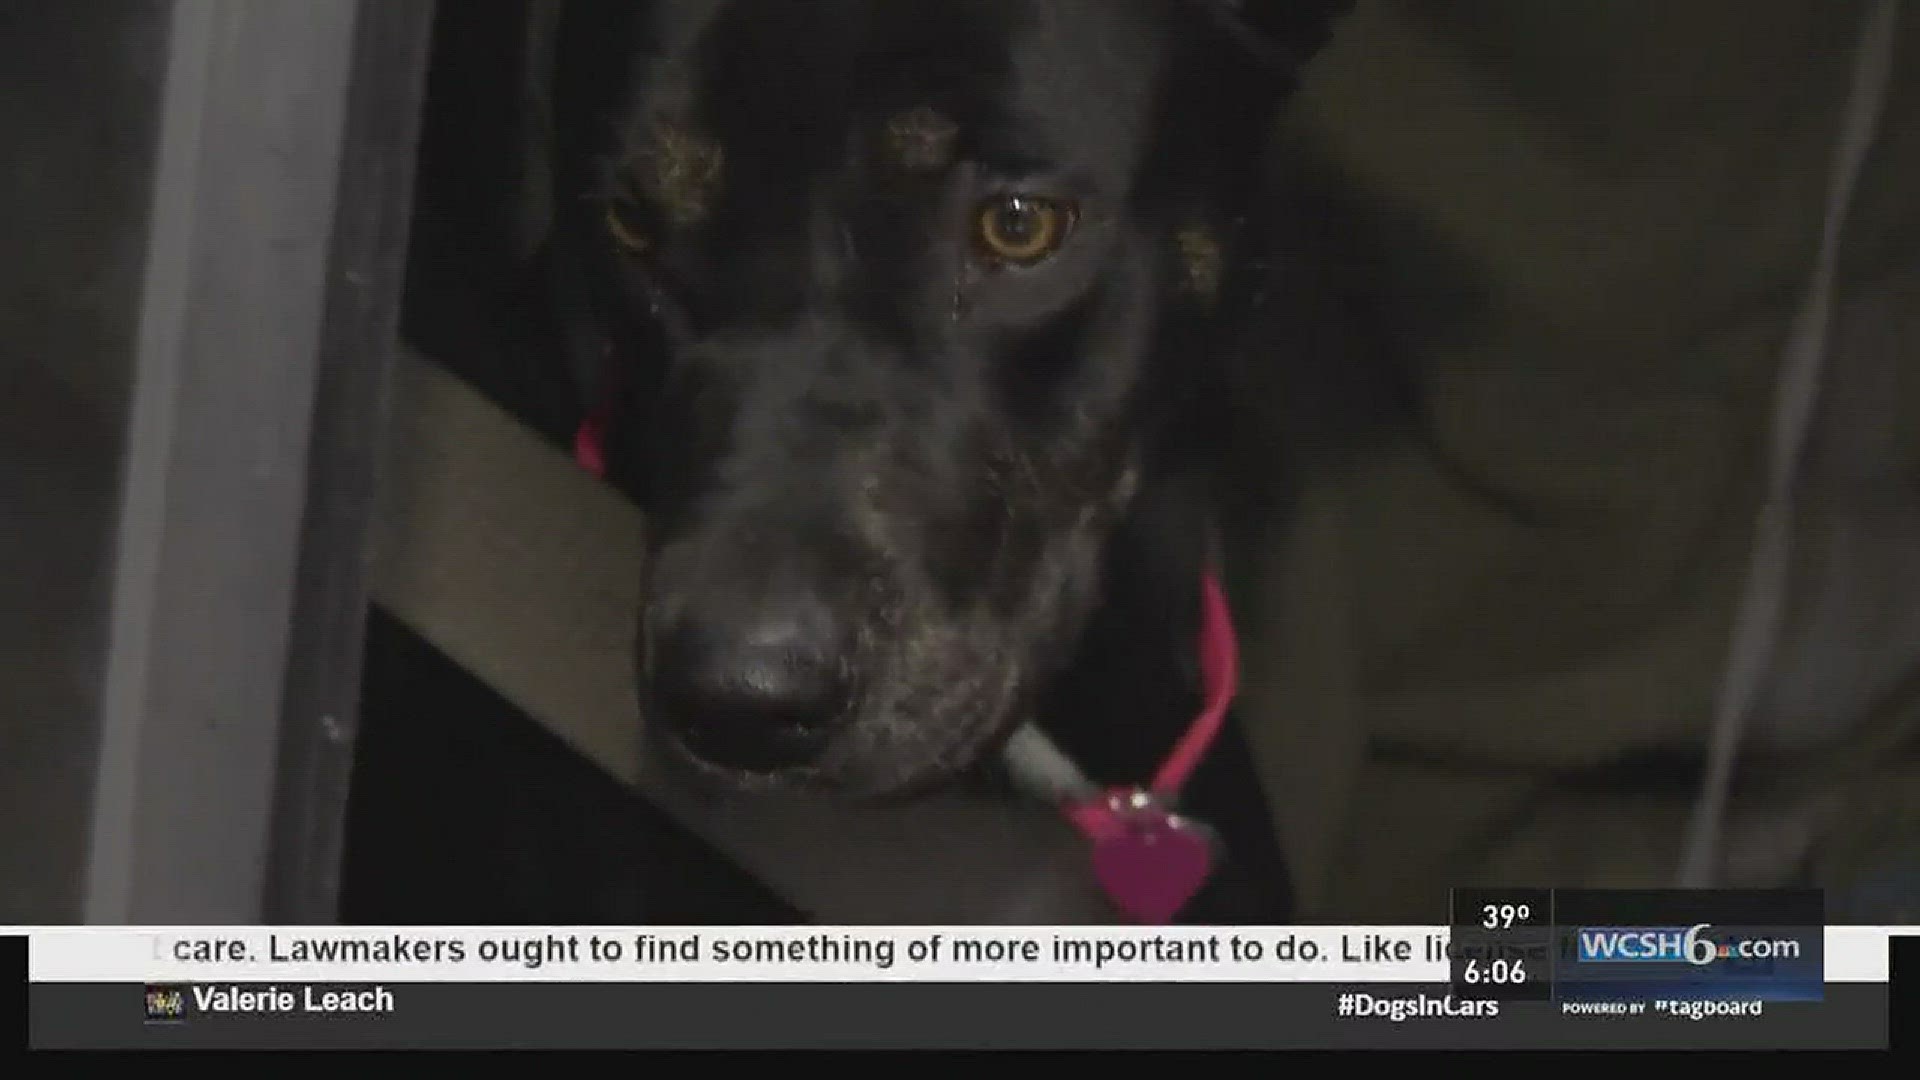 Maine law could require restrained dogs in cars.